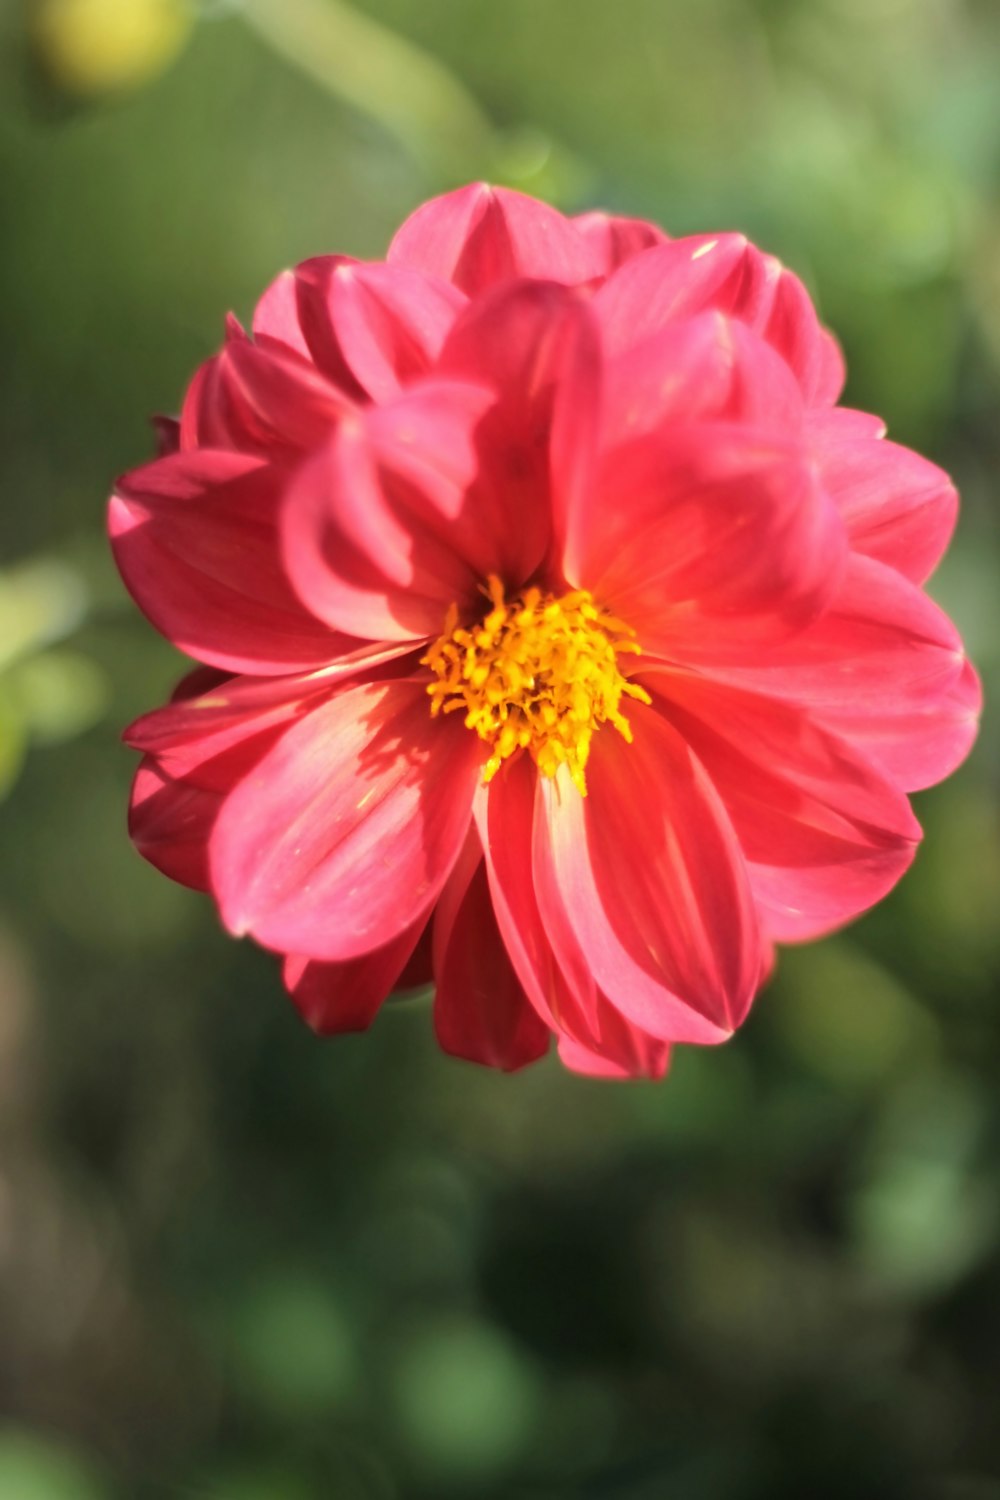 a red flower with a yellow center in a garden